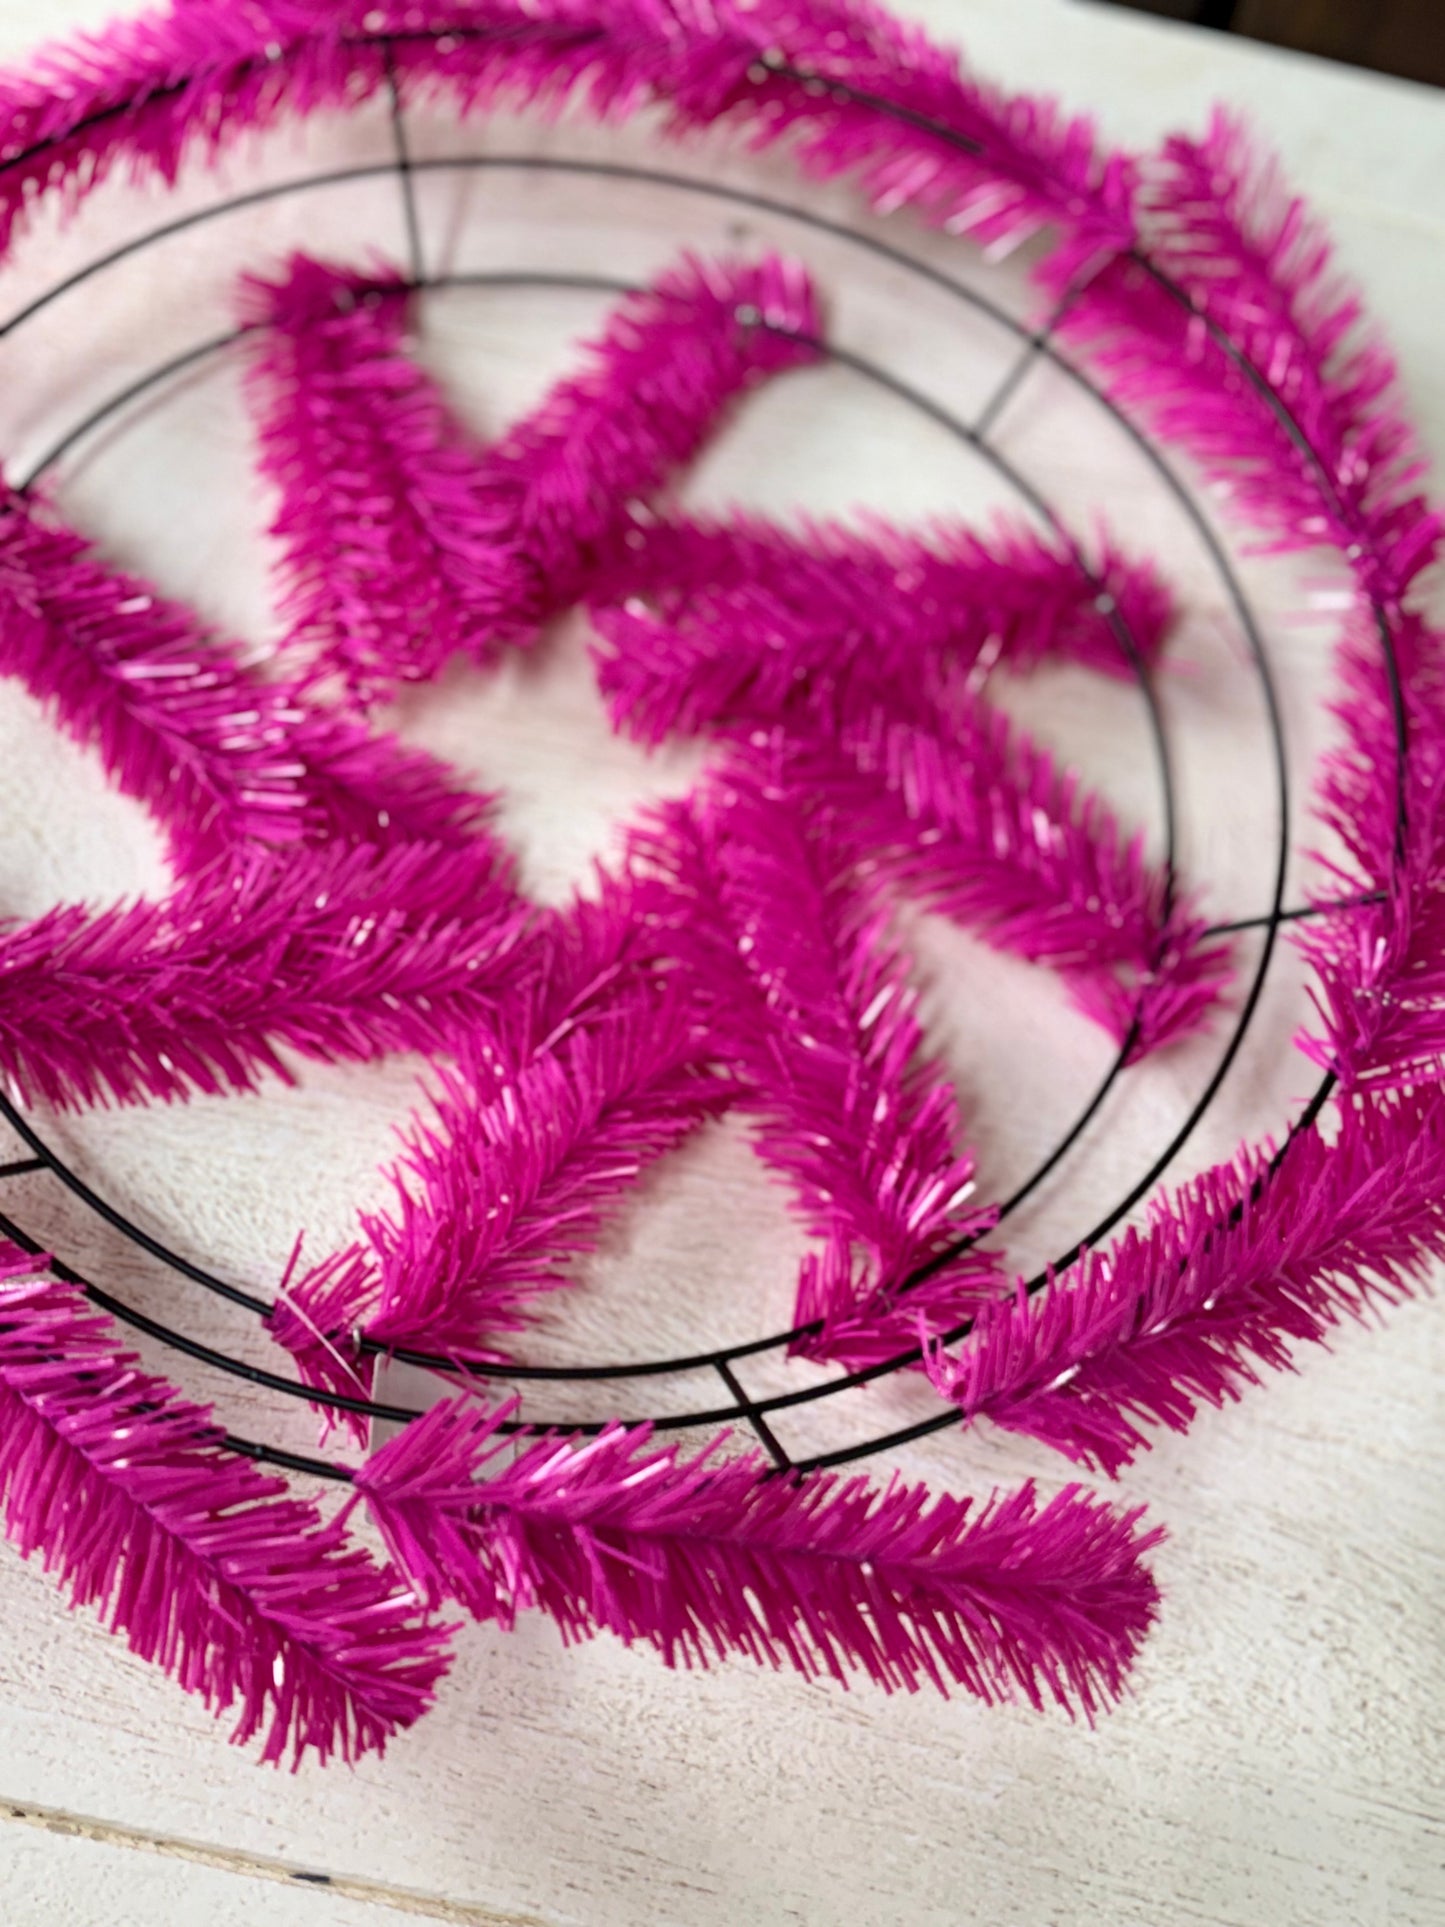 15 Inch Wire, 25 Inch Oad Hot Pink Work Wreath